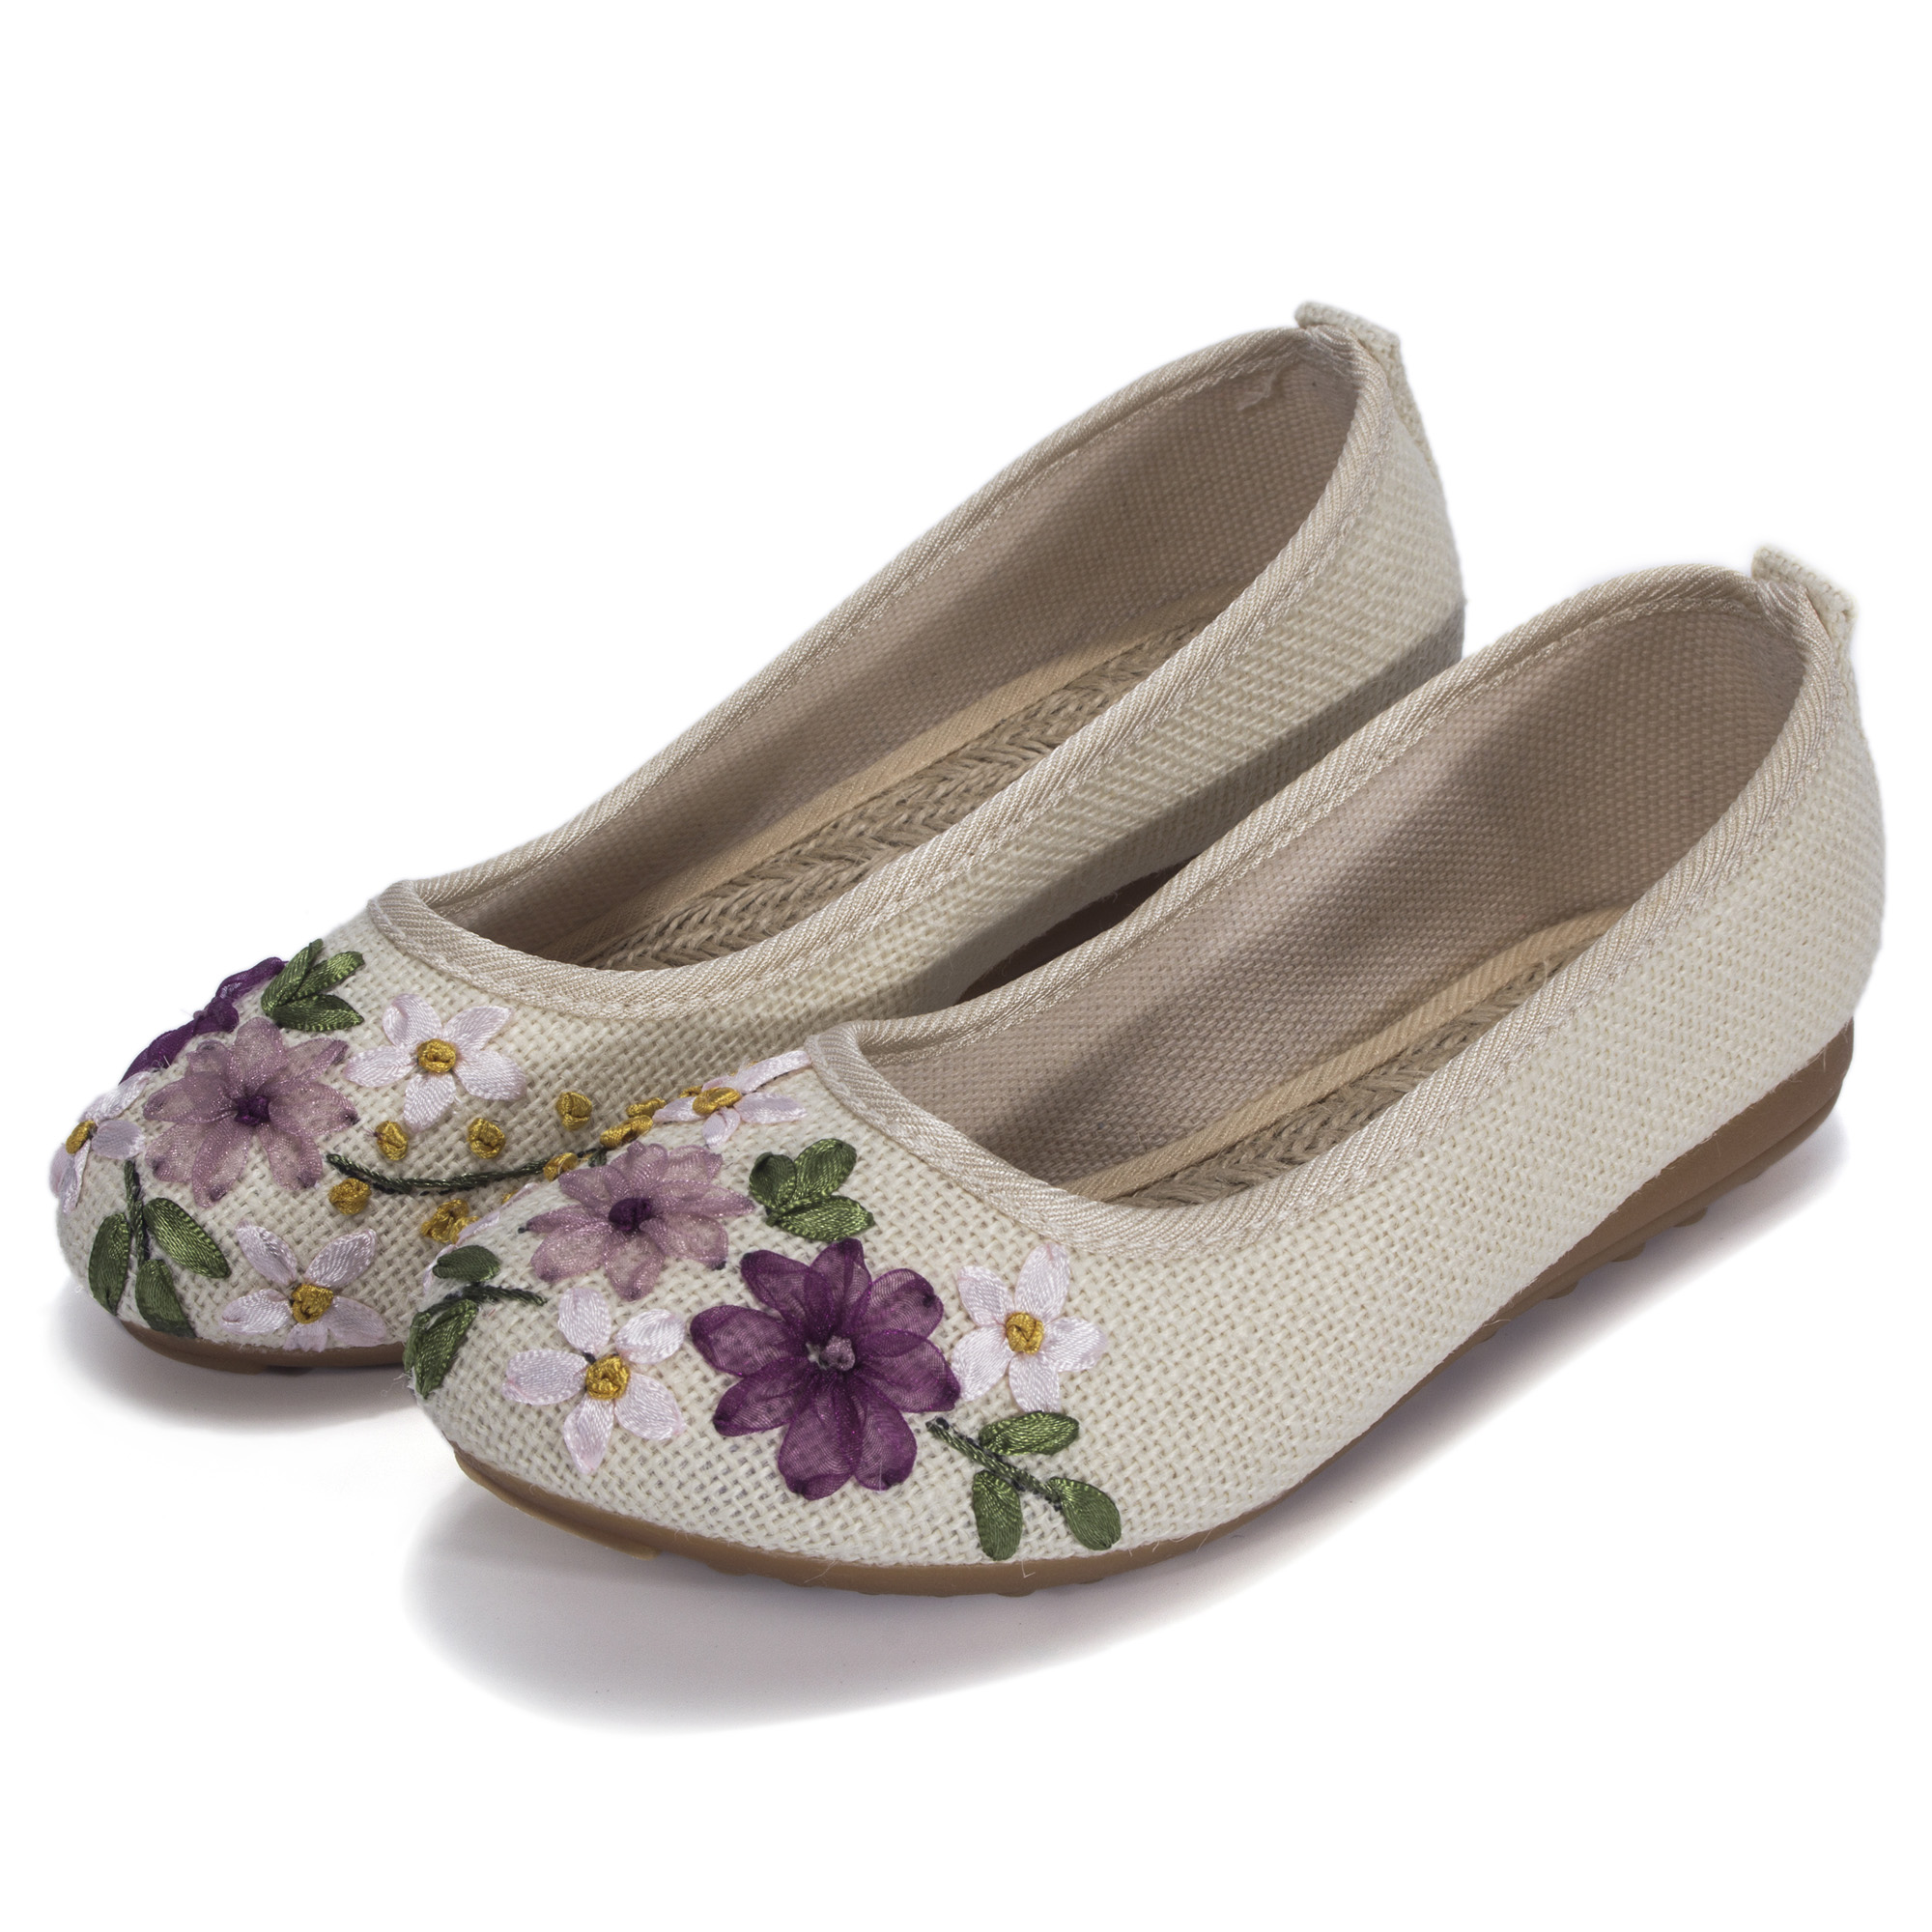 DODOING Womens Ballet Flats Floral Embroidered Cut Platform Shoe Slip On Casual Driving Loafers, Khaki/ White/ Navy Blue, 4-10 Size - image 3 of 7